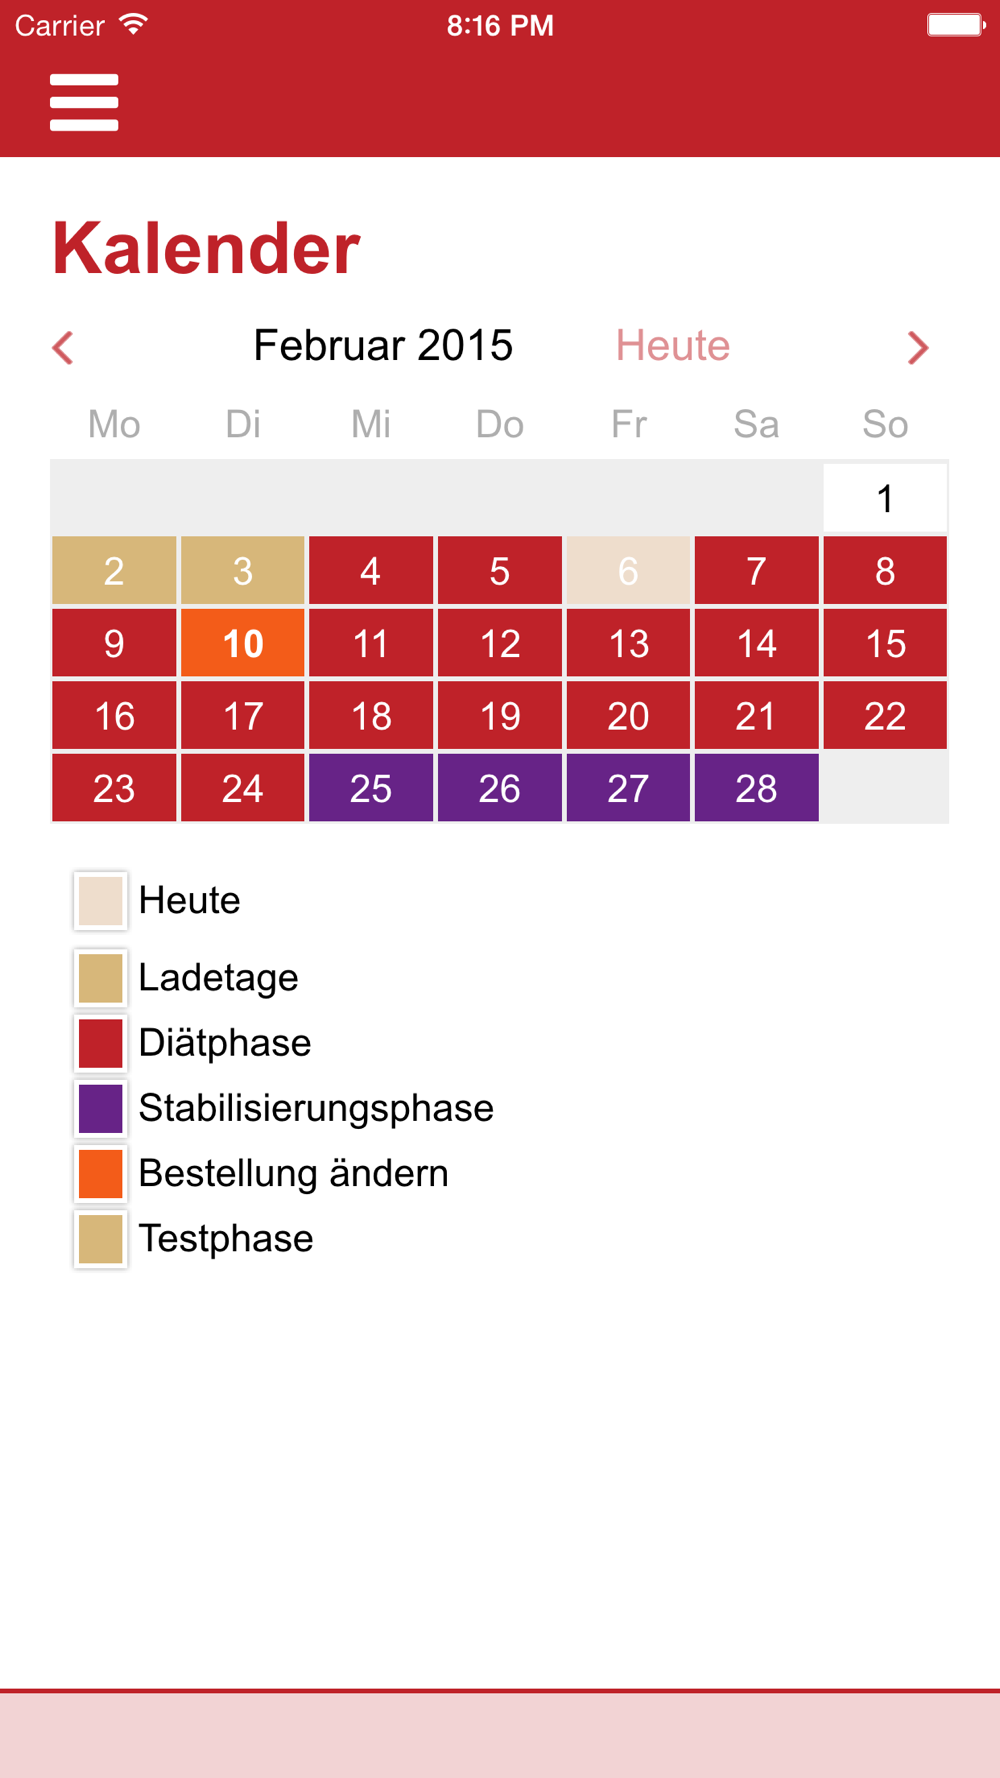 21 Tage Stoffwechselkur Download App for iPhone - STEPrimo.com